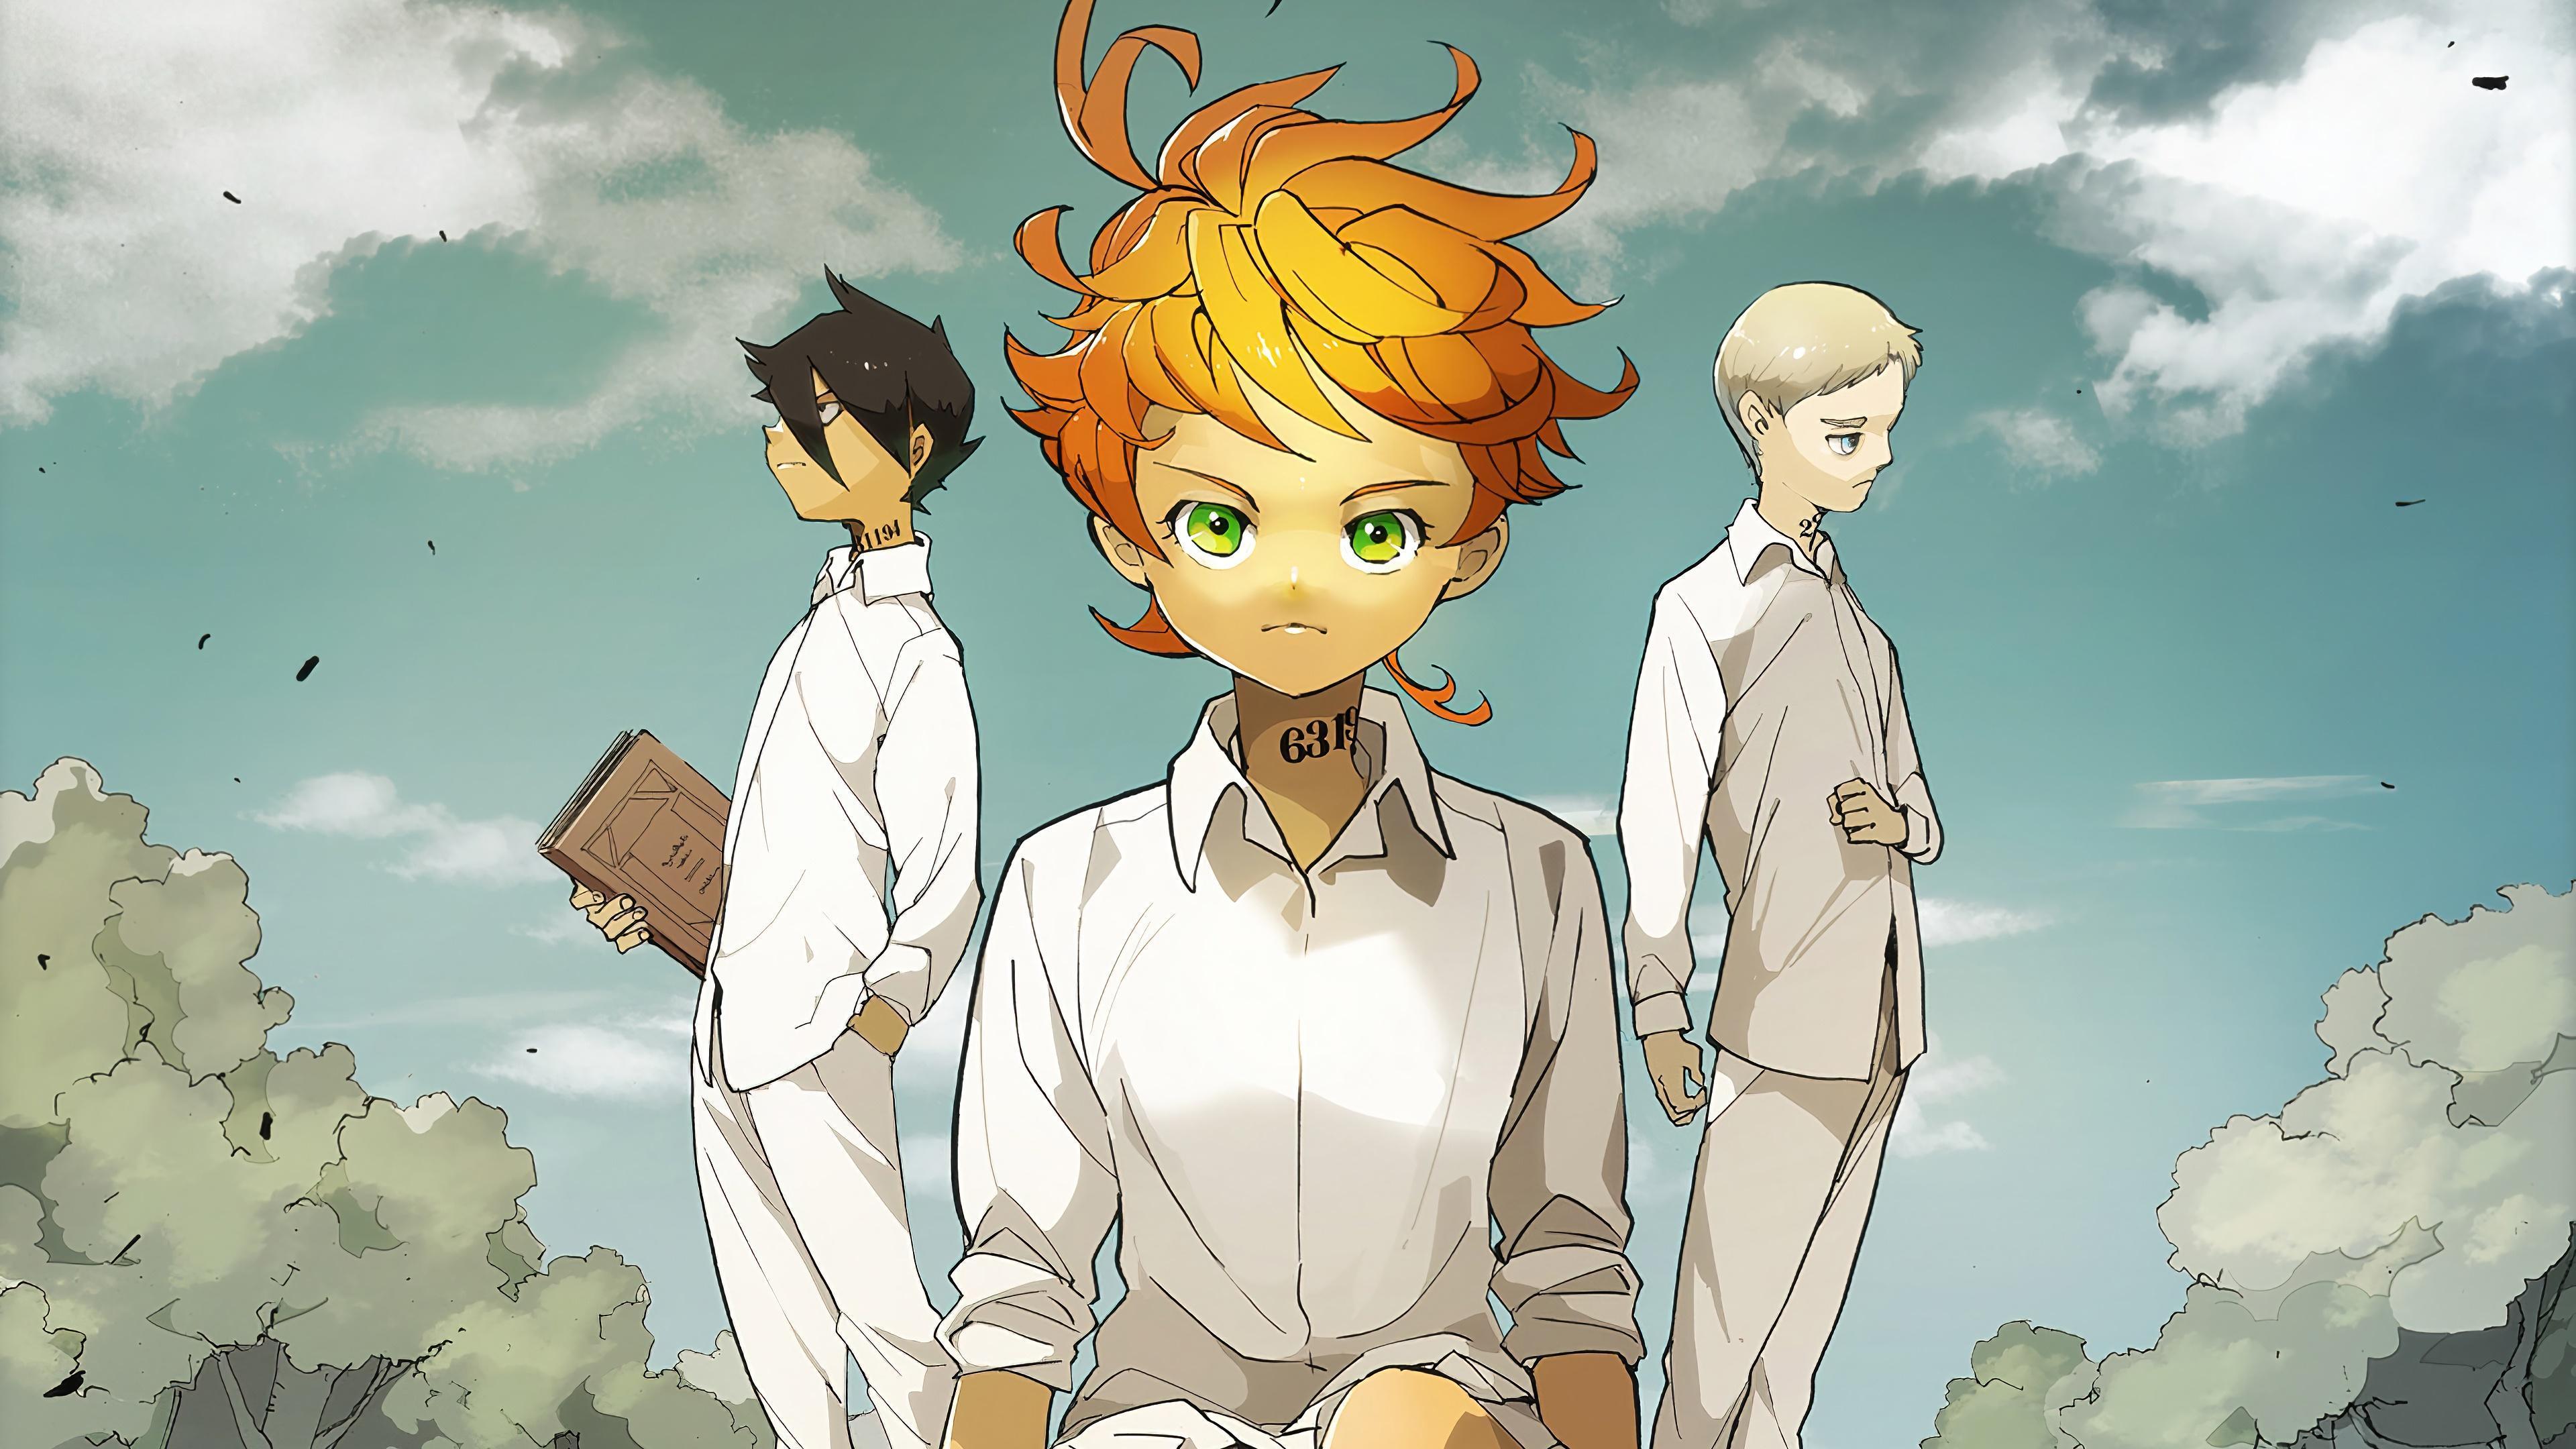 HD wallpaper, Wallpaper, The Promised Neverland, Ray, Norman, Hd, Emma, 4K